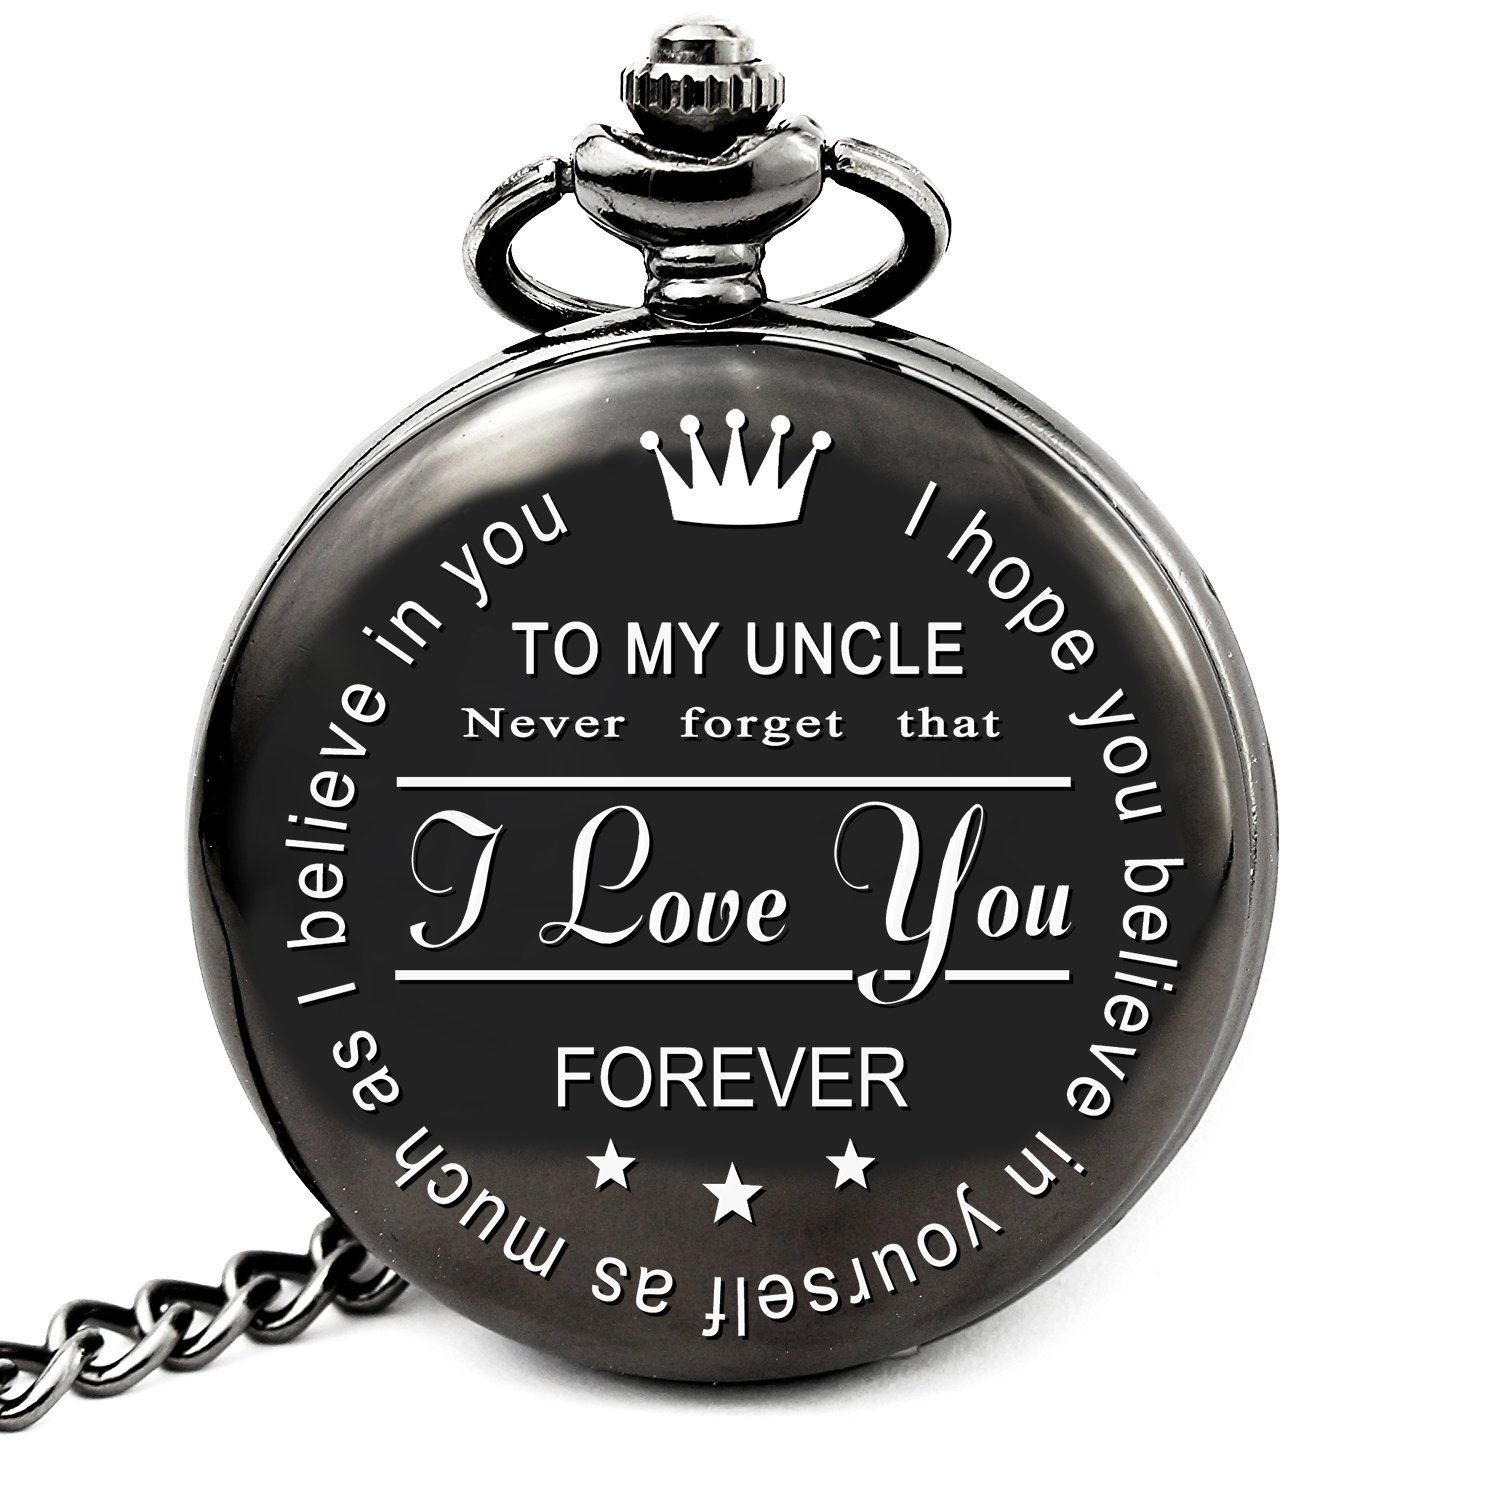 Men Gifts for Birthday Anniversary Valentines Day Graduation Fathers Day Christmas, Personalized Pocket Watch for Him